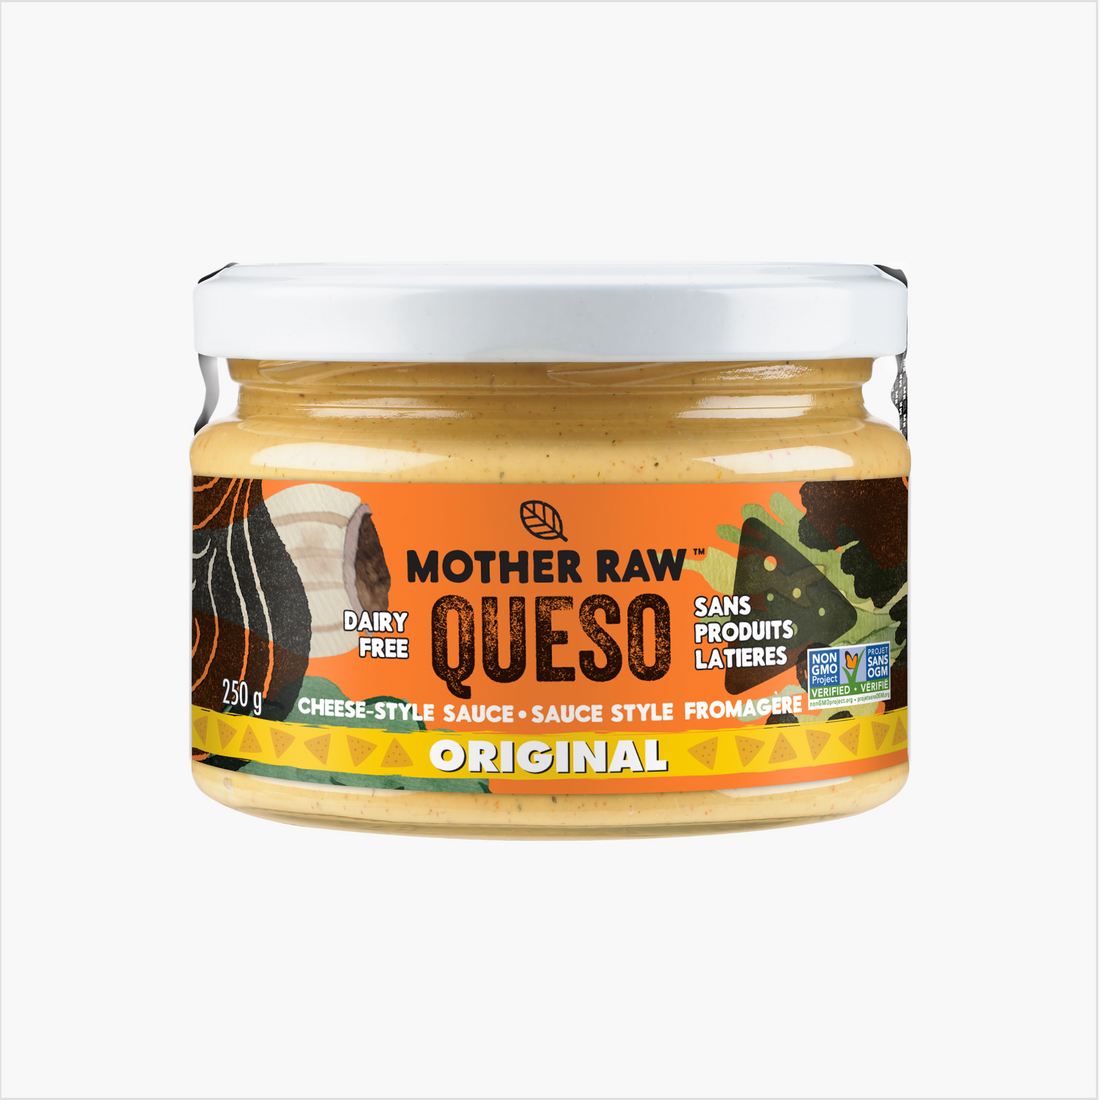 Mother Raw Queso - Original (250g) - Lifestyle Markets